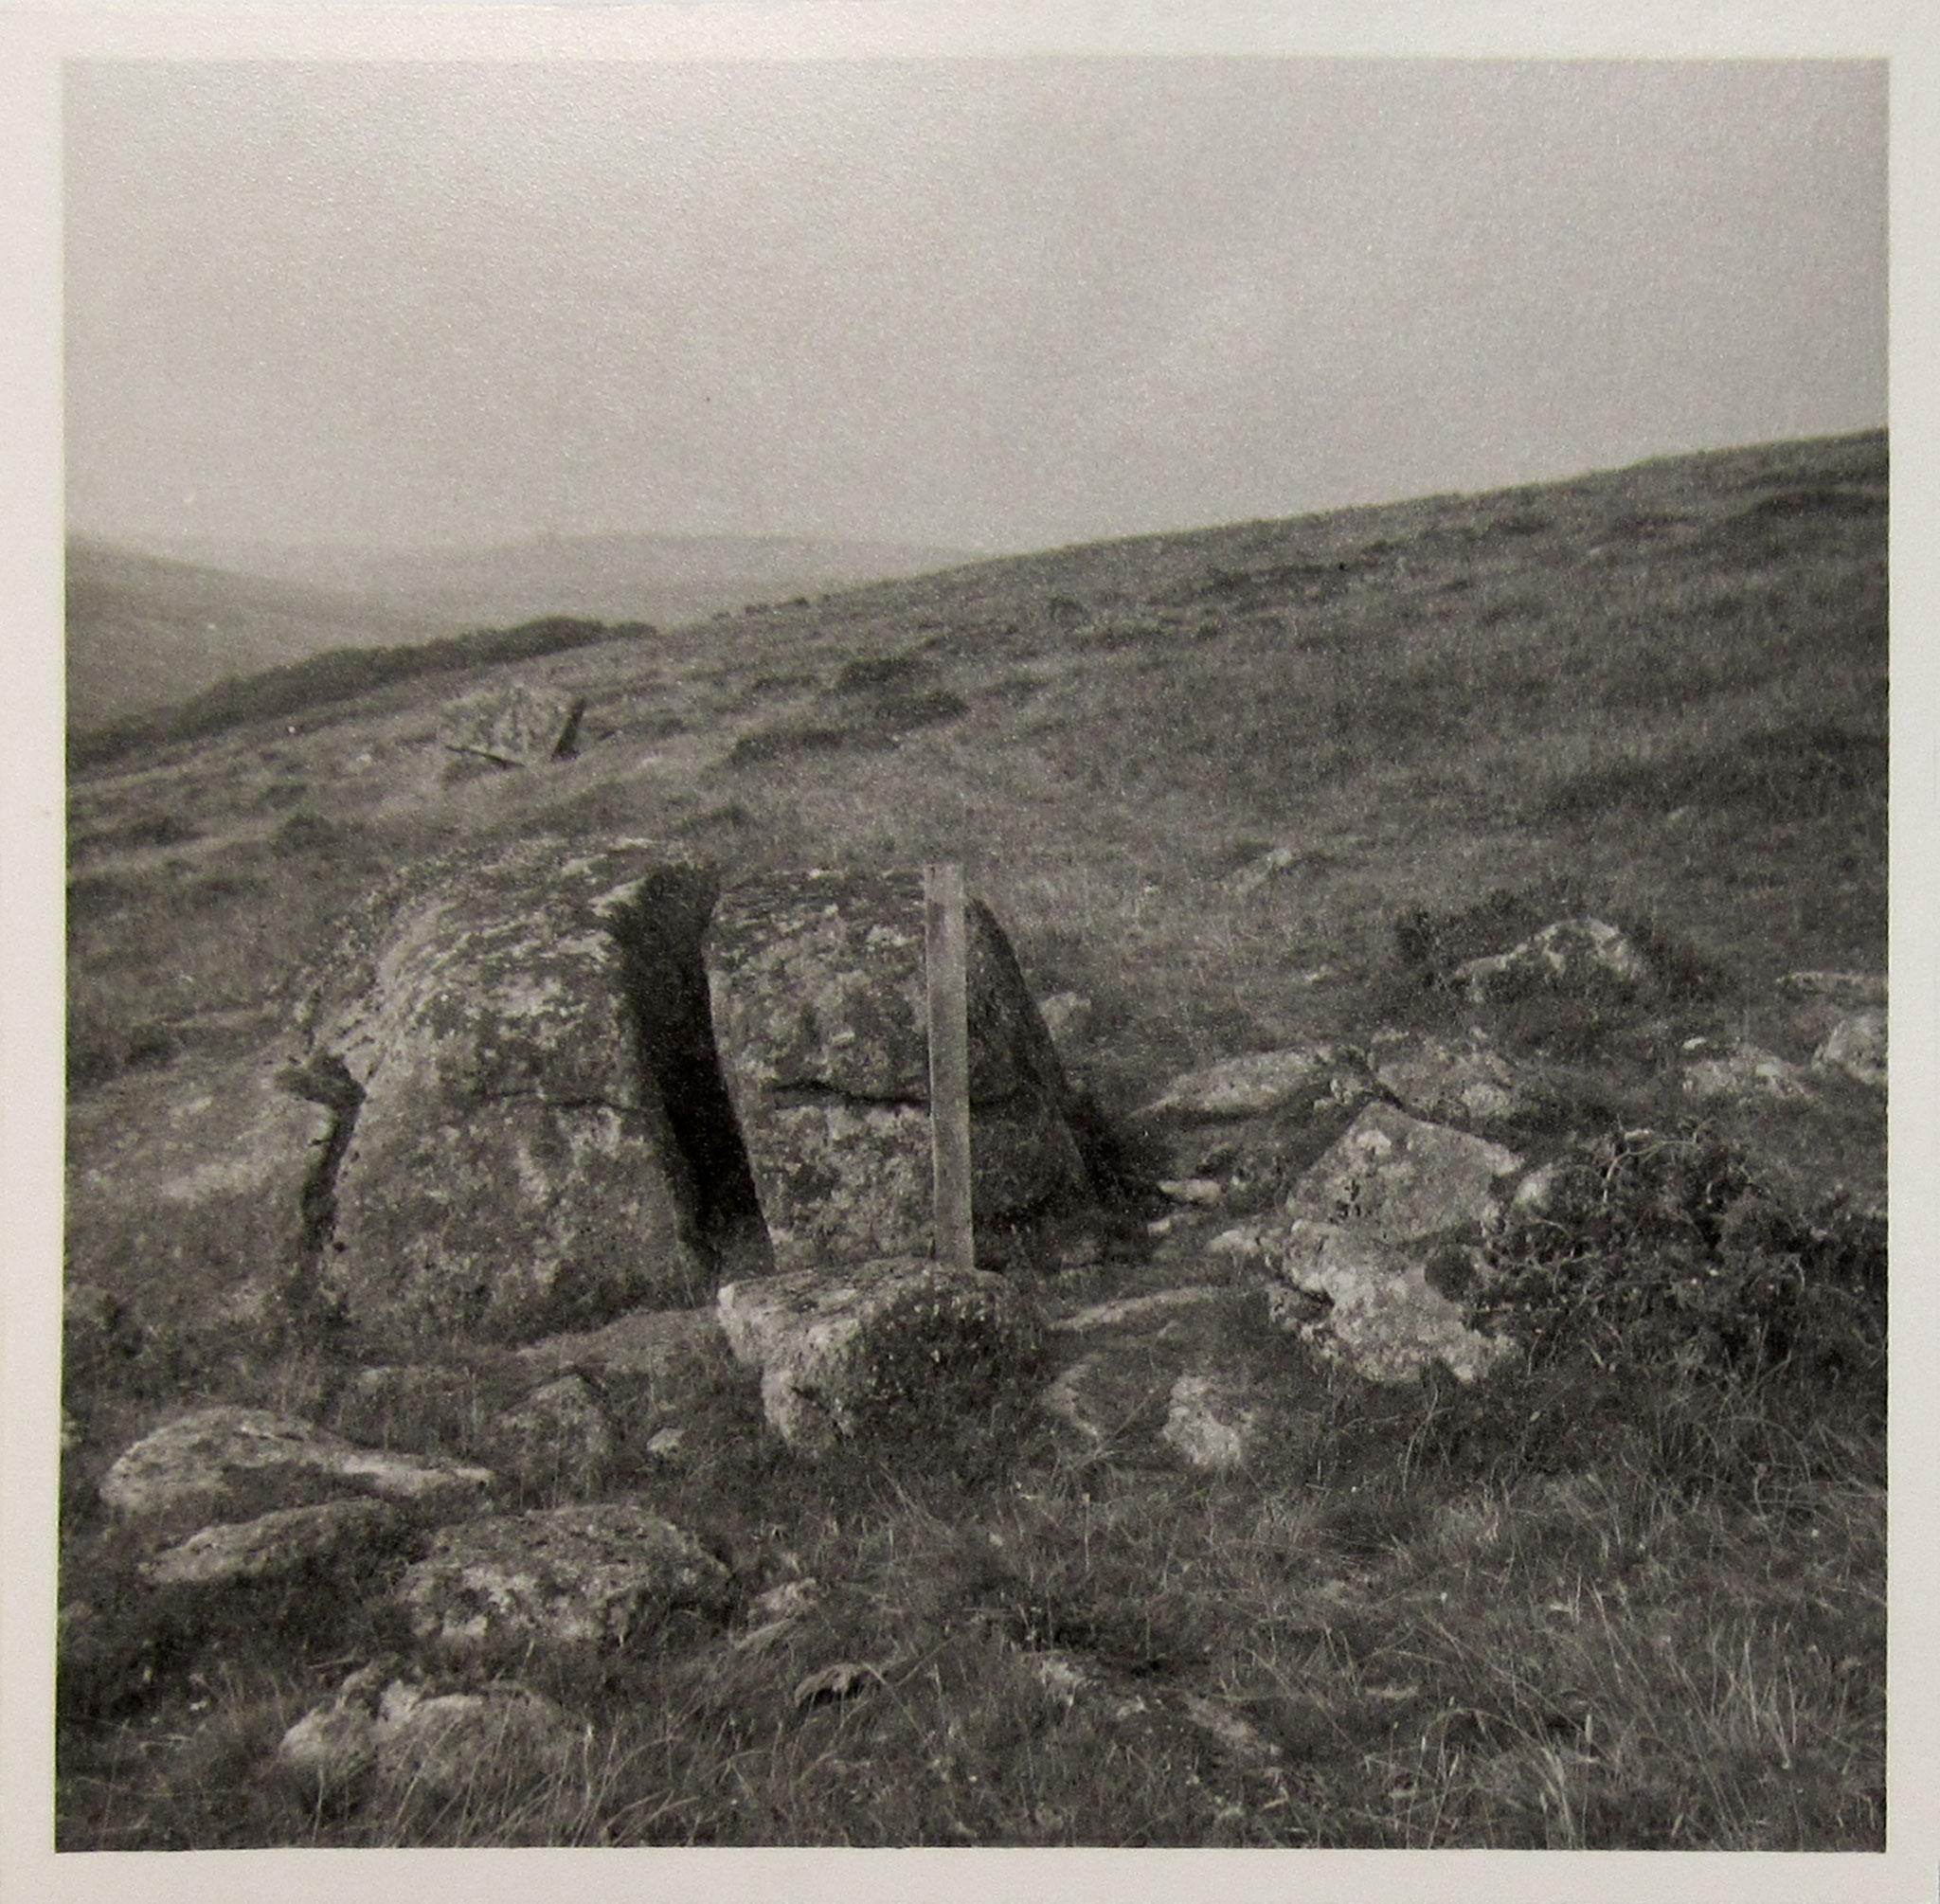 black and white image of a large boulder in the foreground and rolling hills in the background